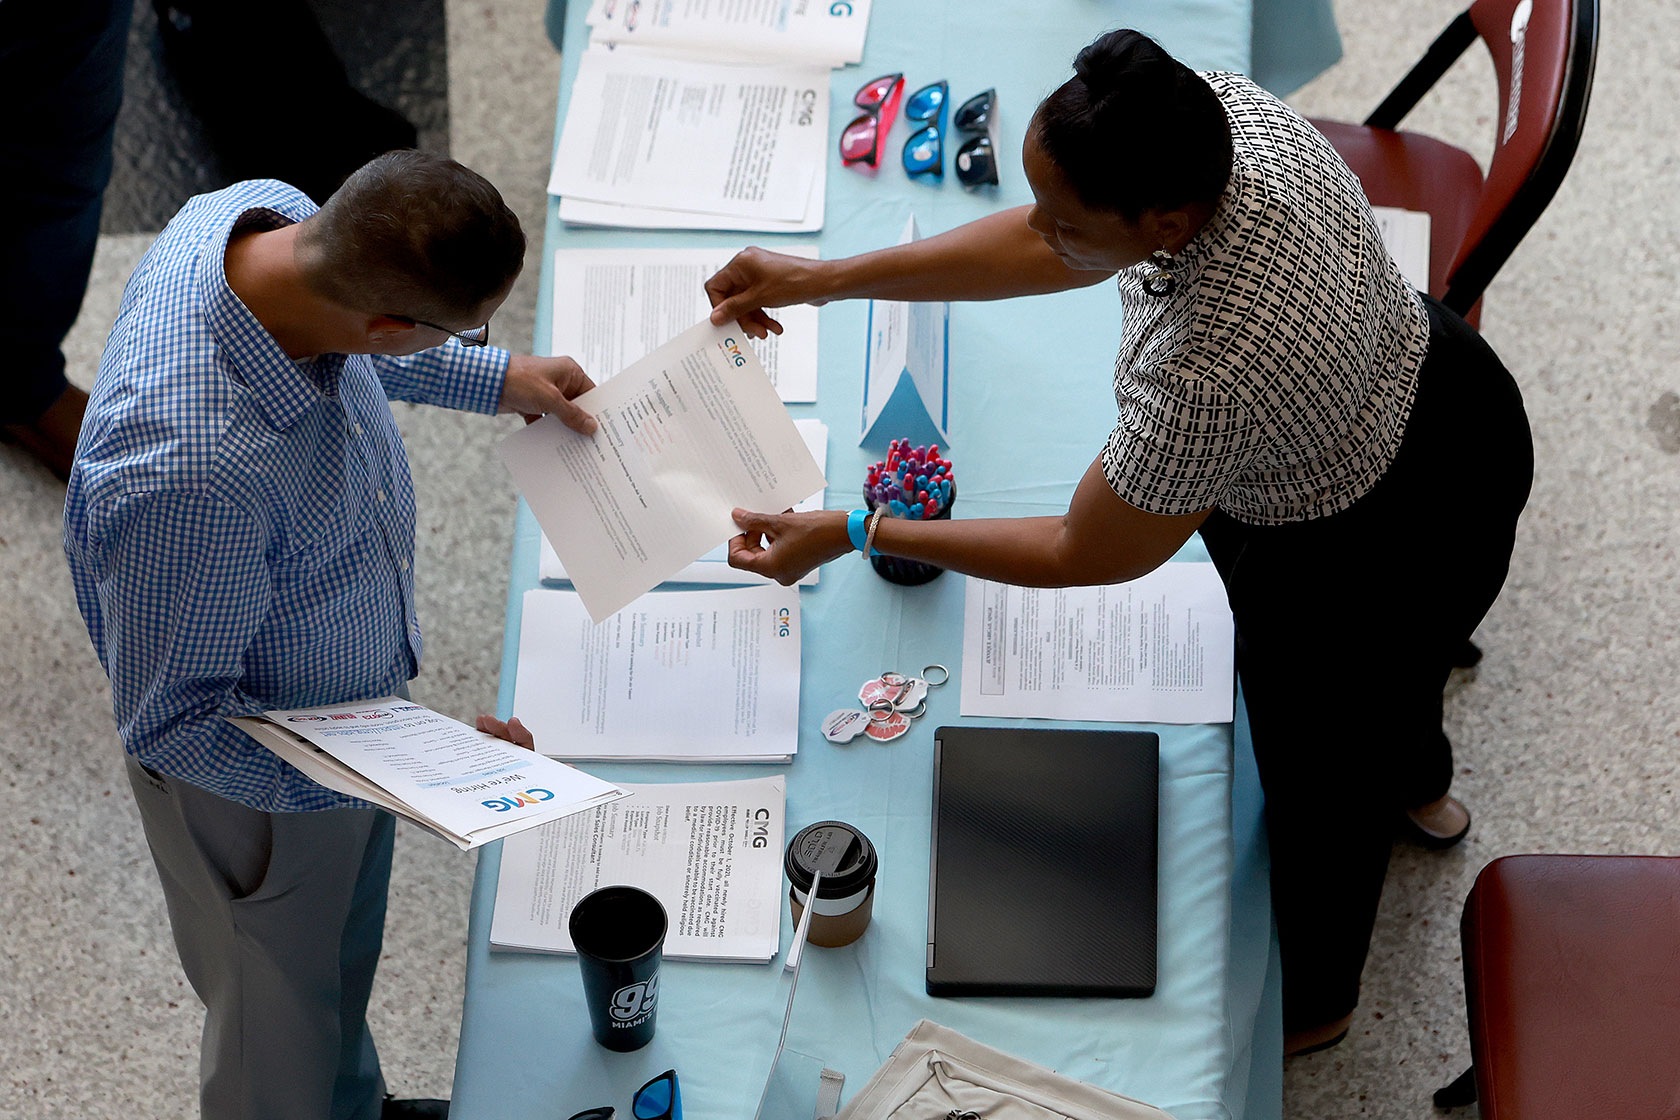 A recruiter helps people look for work during a job fair.